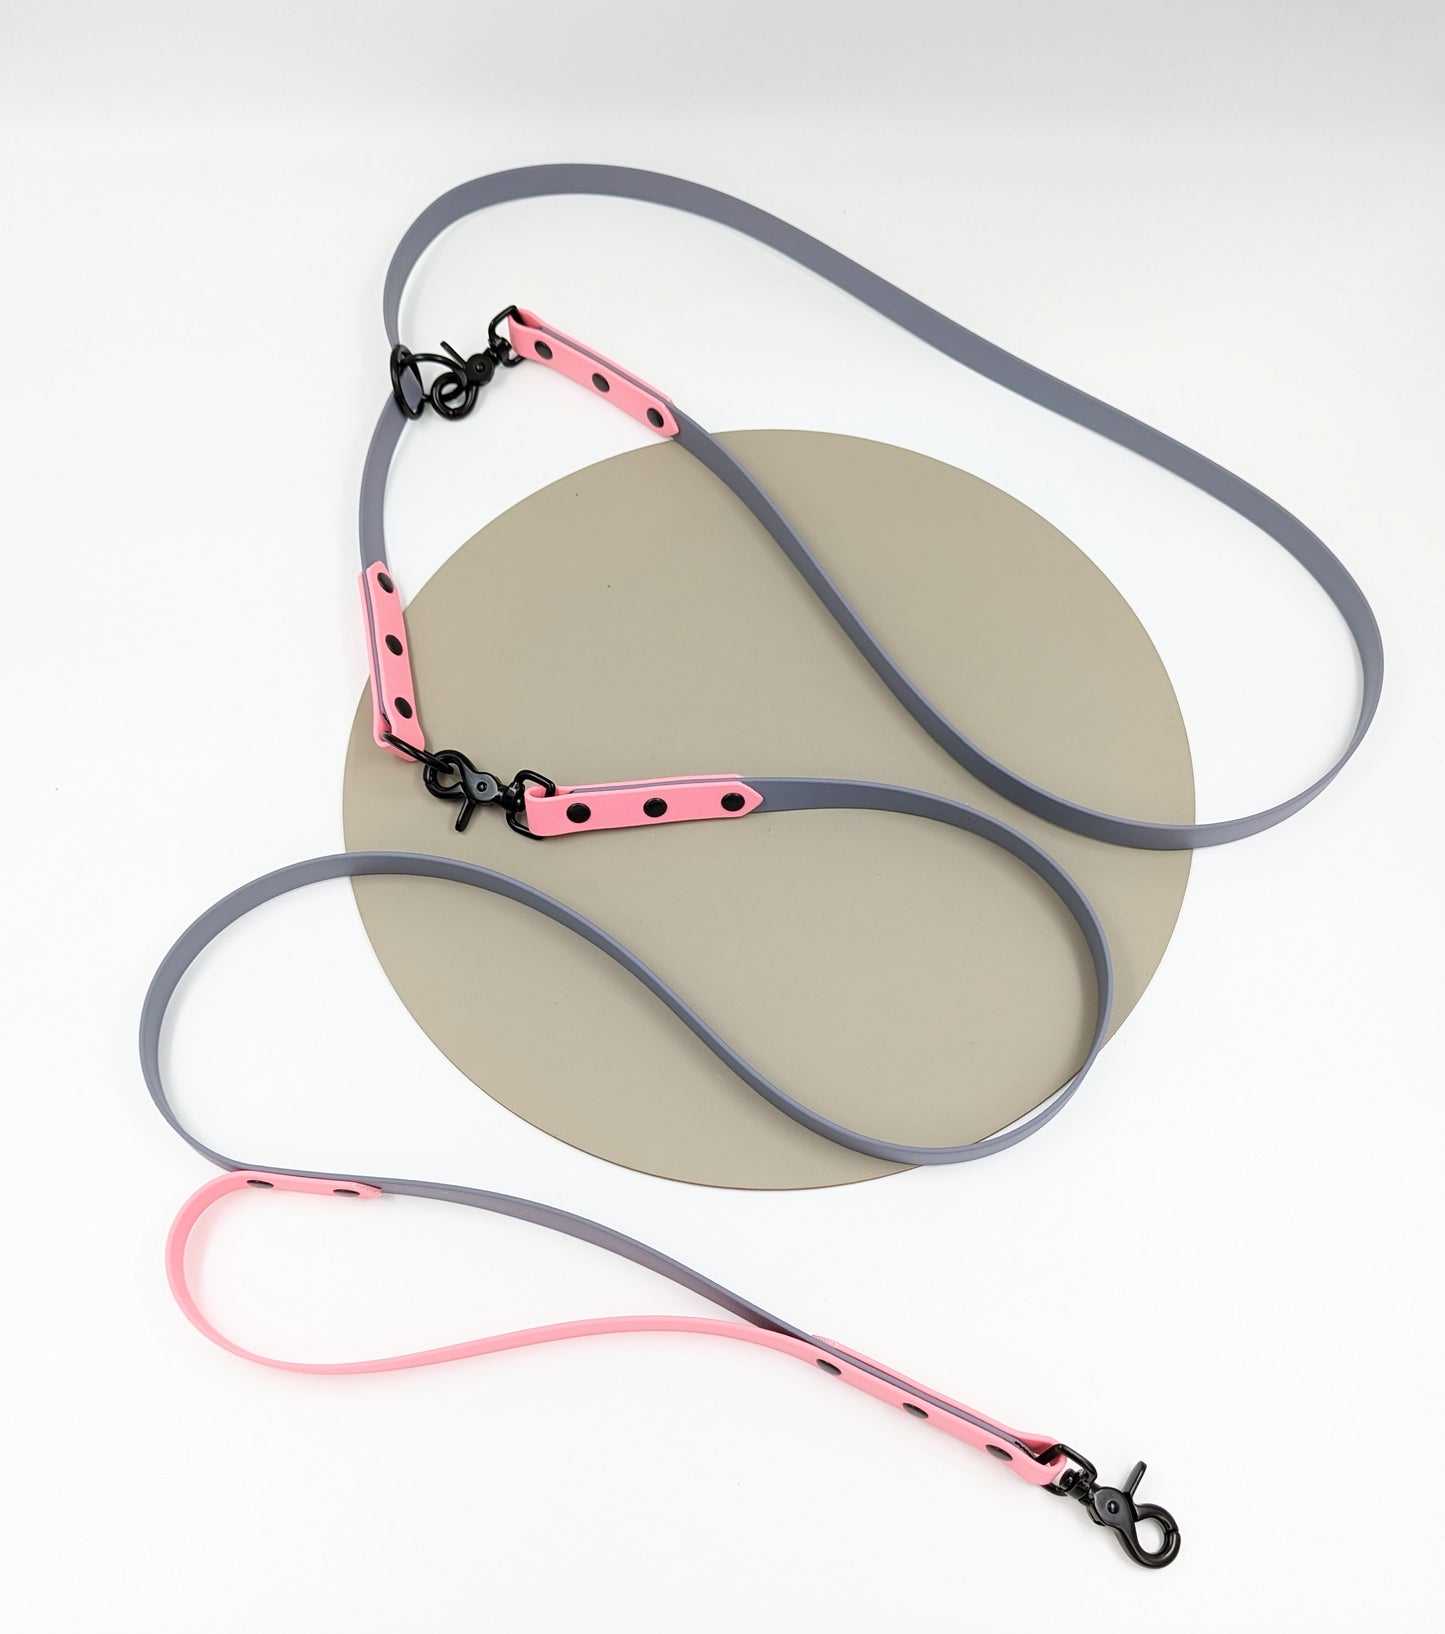 Biothane hands free walking lead - Design your own